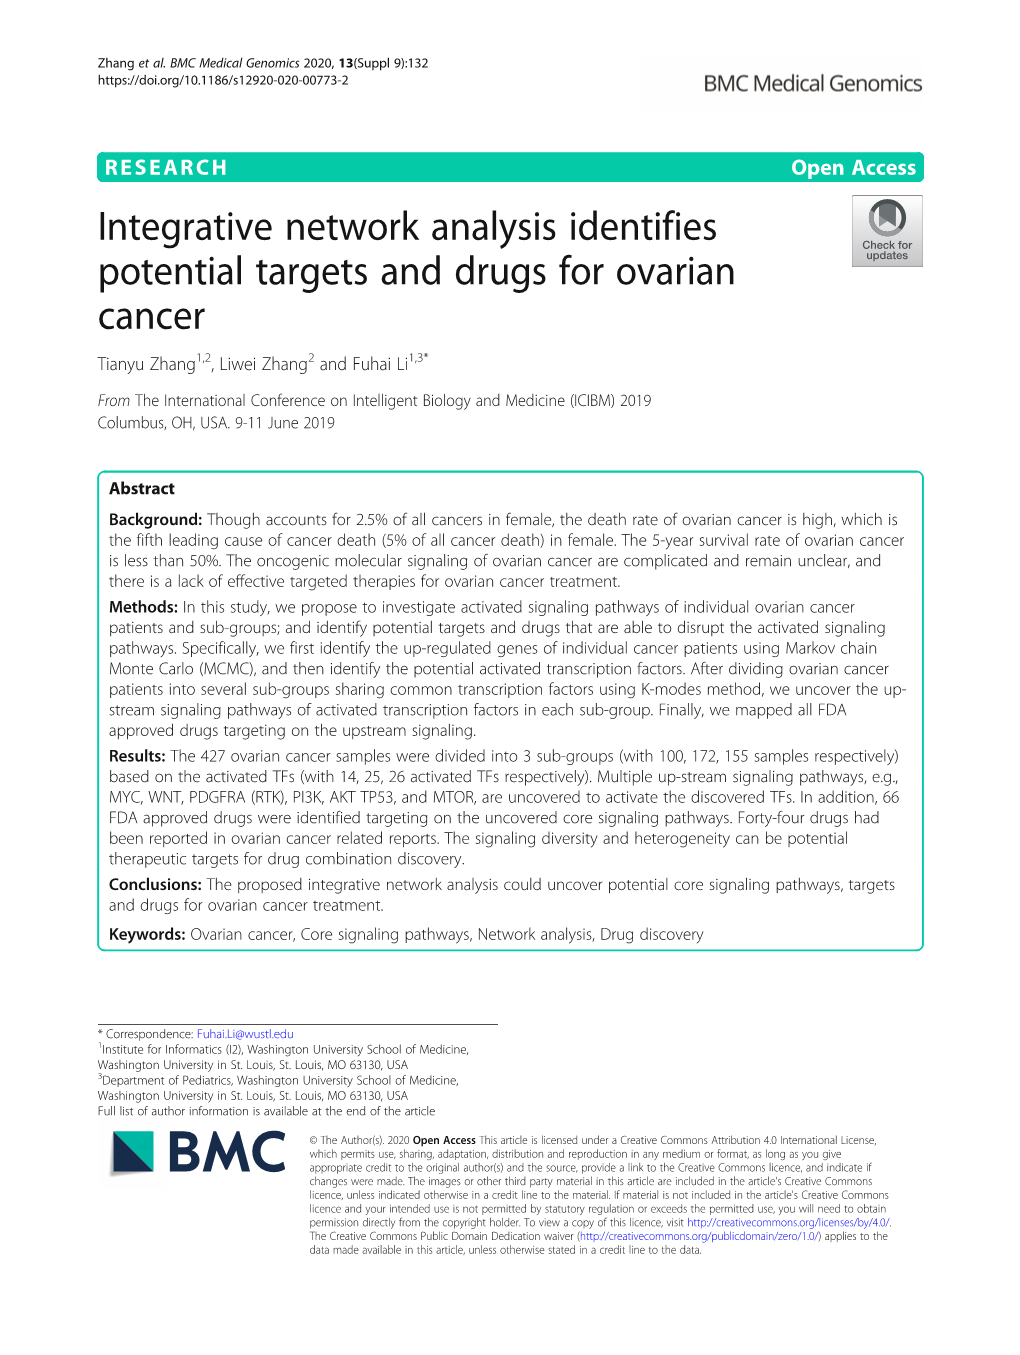 Integrative Network Analysis Identifies Potential Targets and Drugs for Ovarian Cancer Tianyu Zhang1,2, Liwei Zhang2 and Fuhai Li1,3*